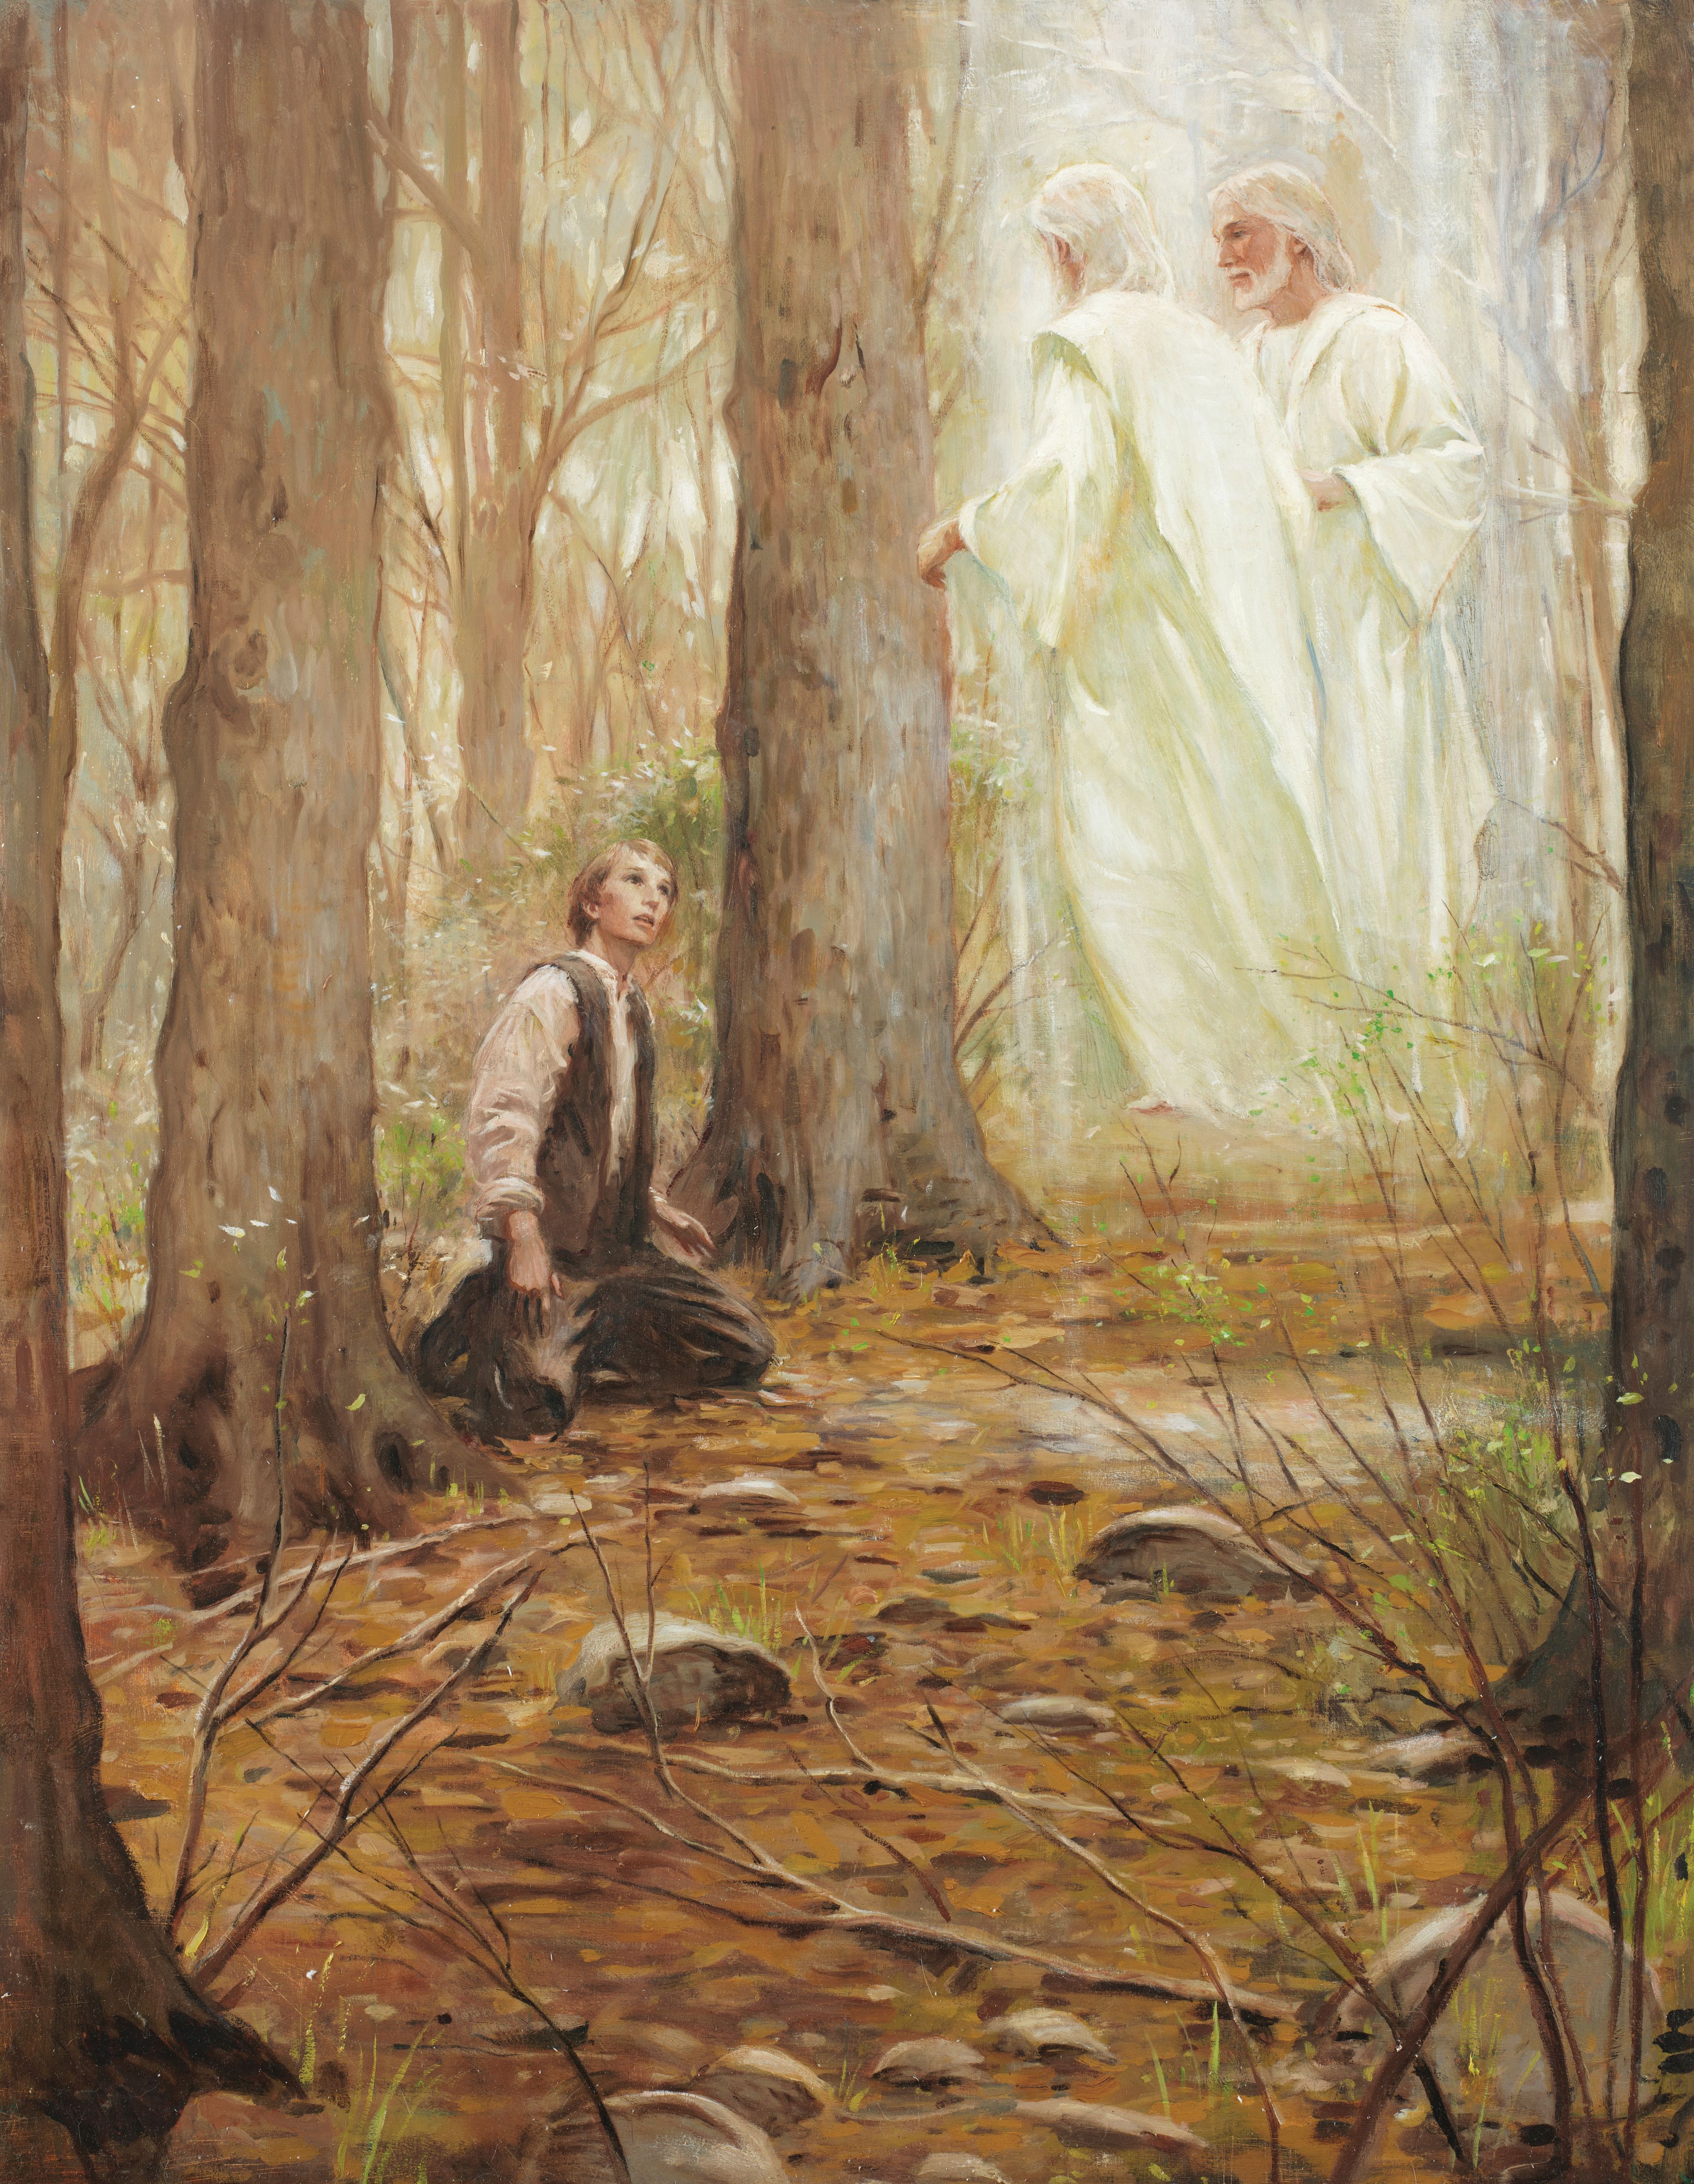 First Vision, by Walter Rane.